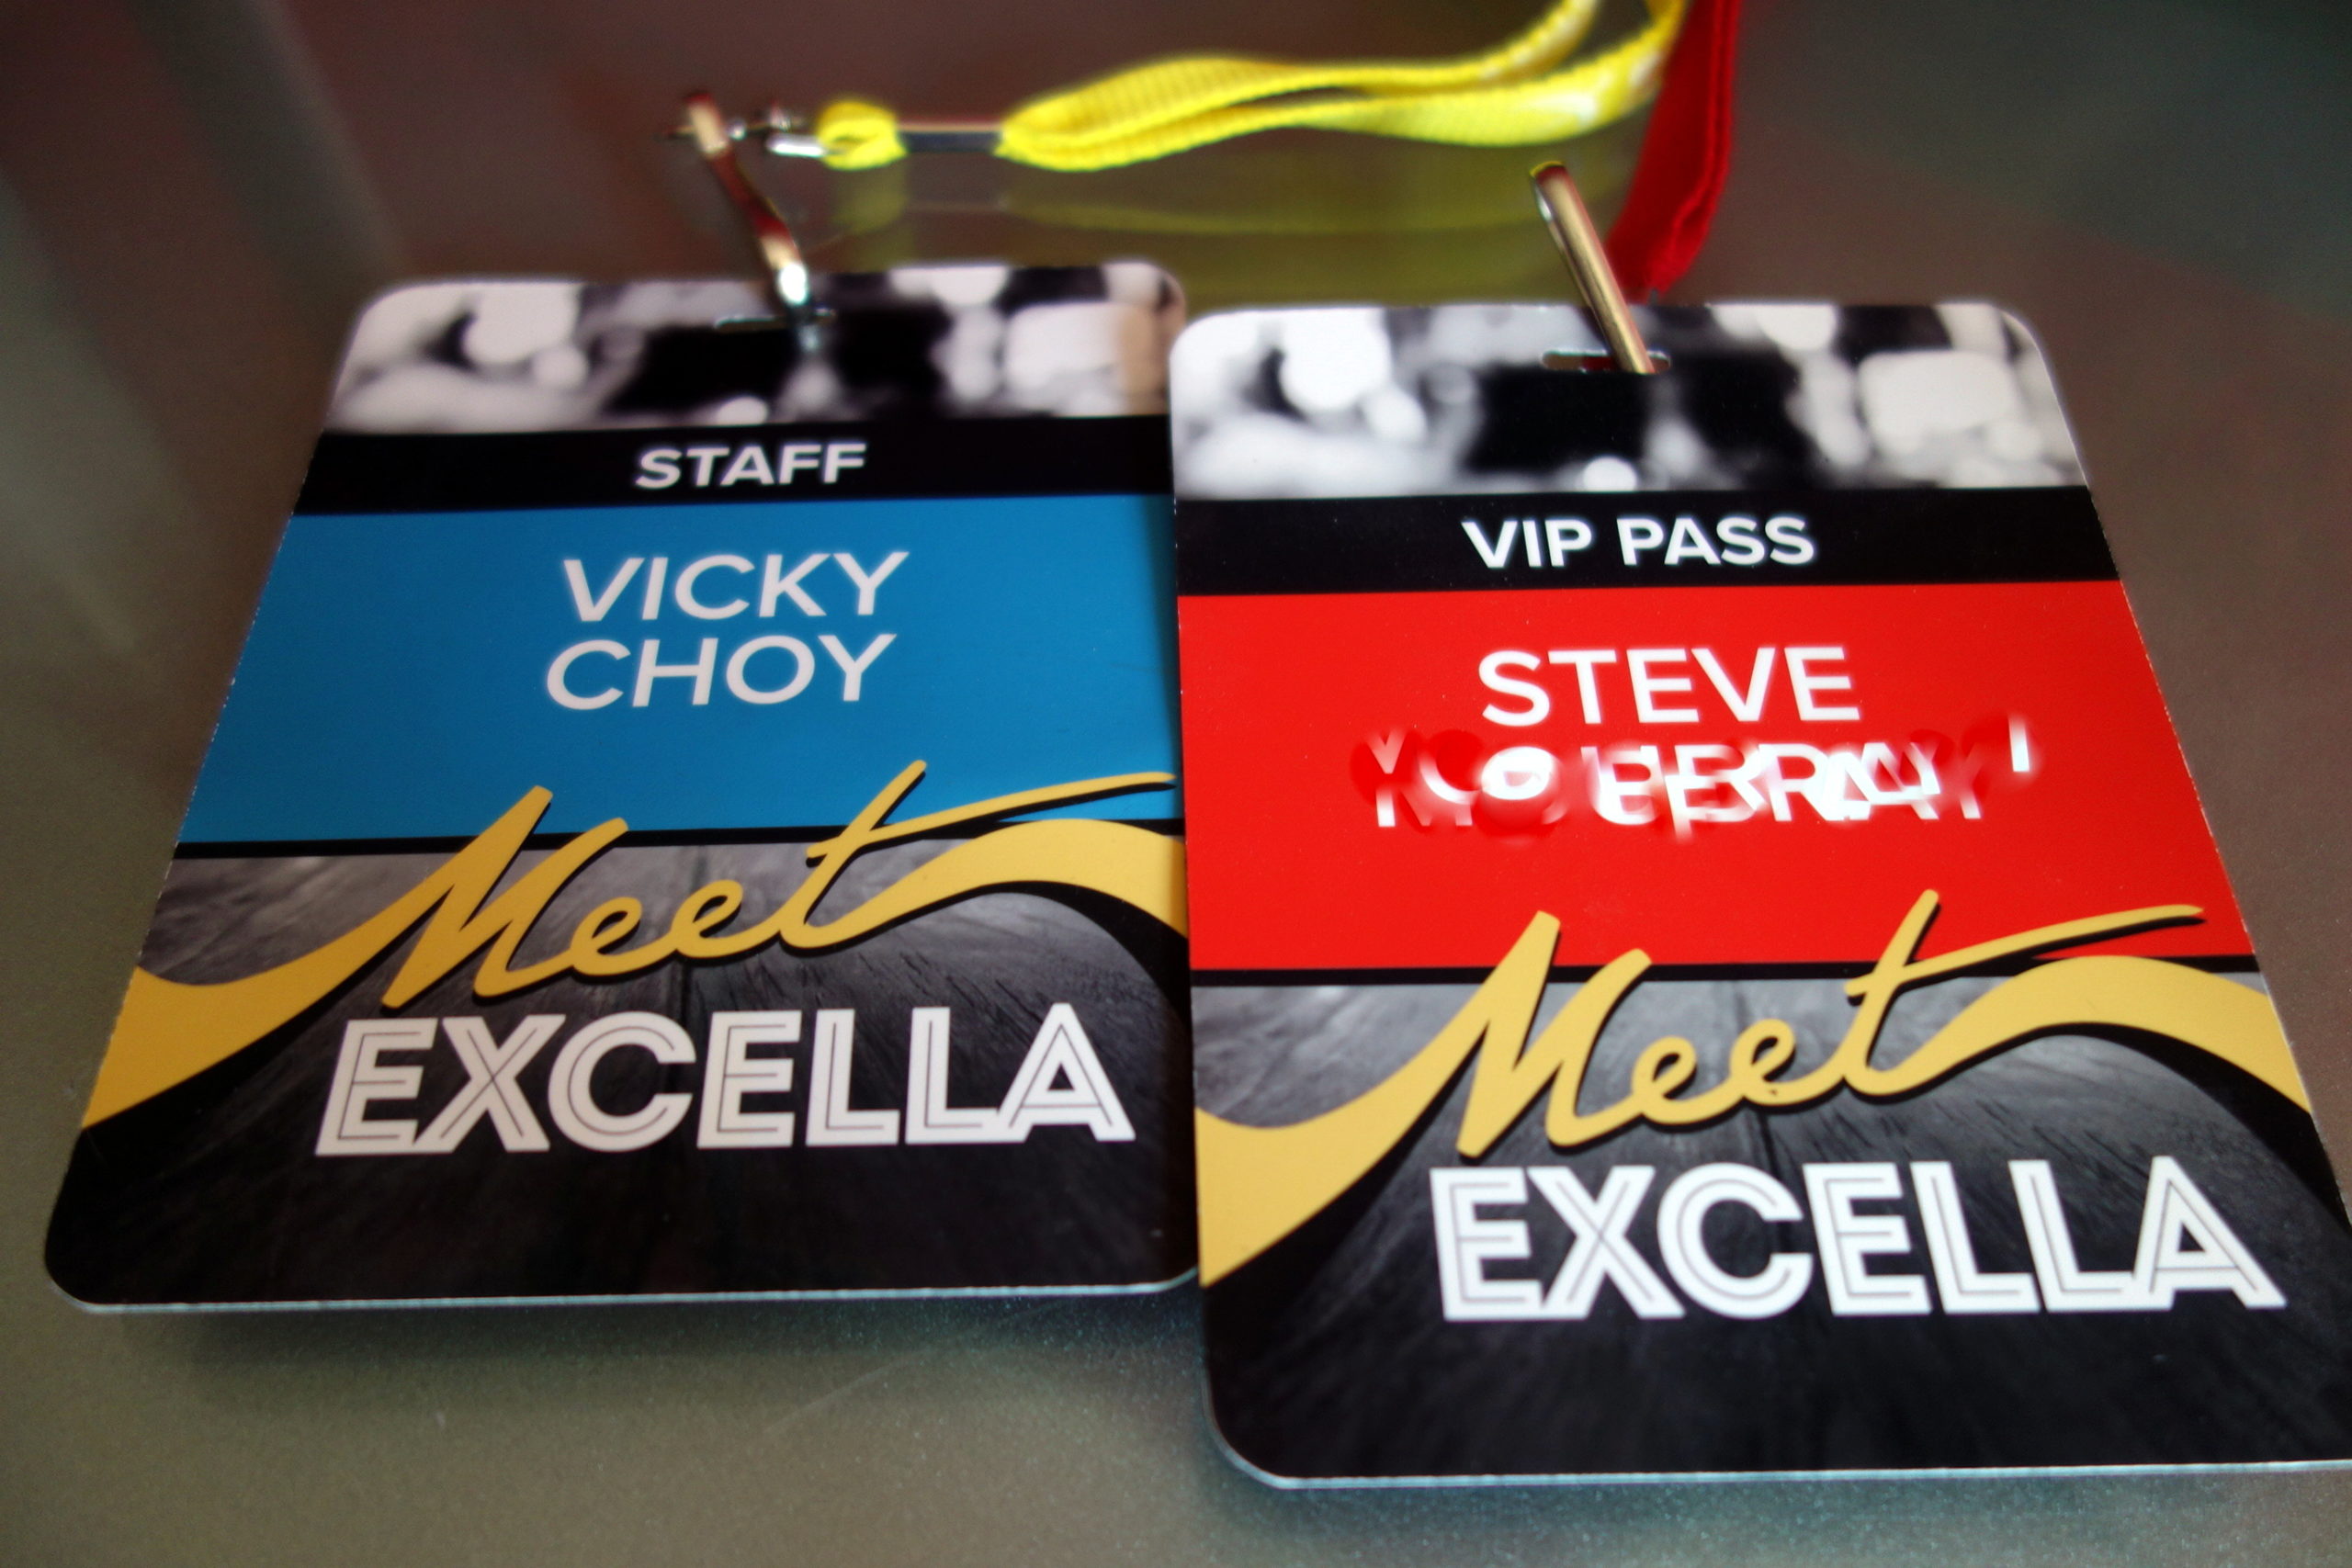 rock concert inspired name badges corporate event